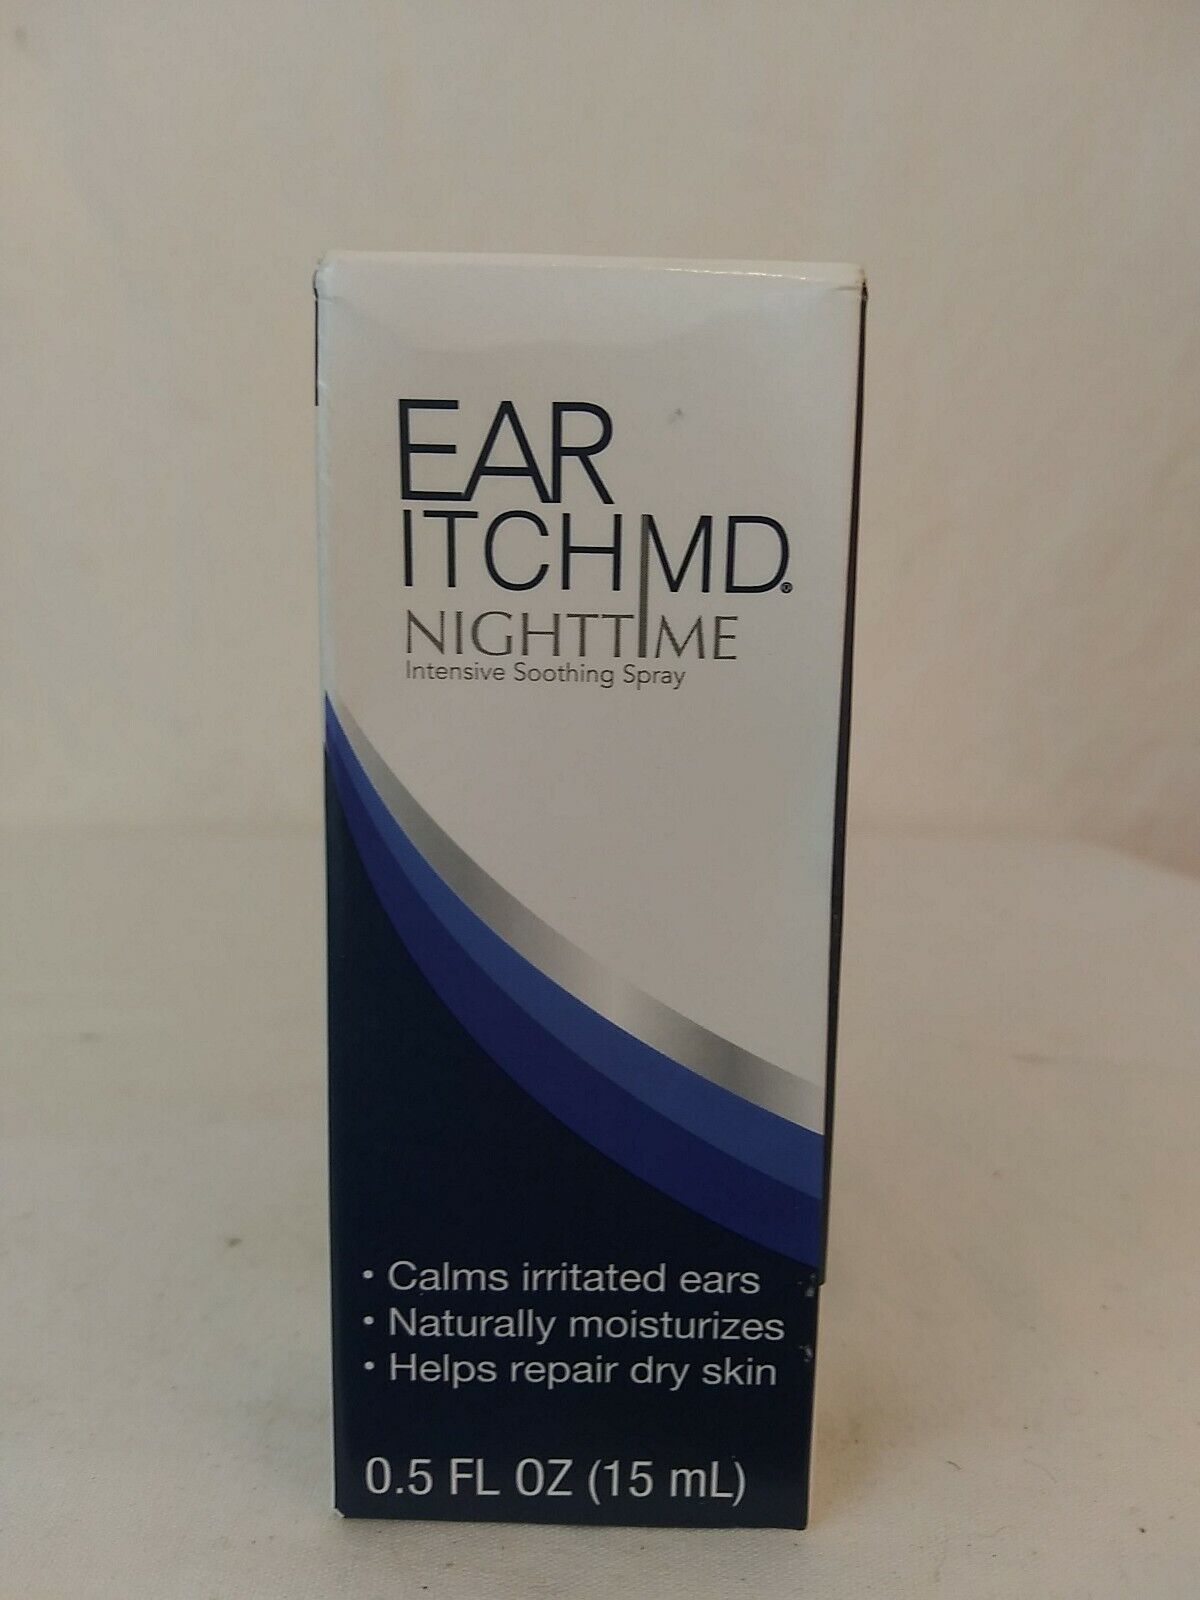 Ear Itch MD Nighttime Intensive Soothing Spray-1 Bottle 0.5 Fl.